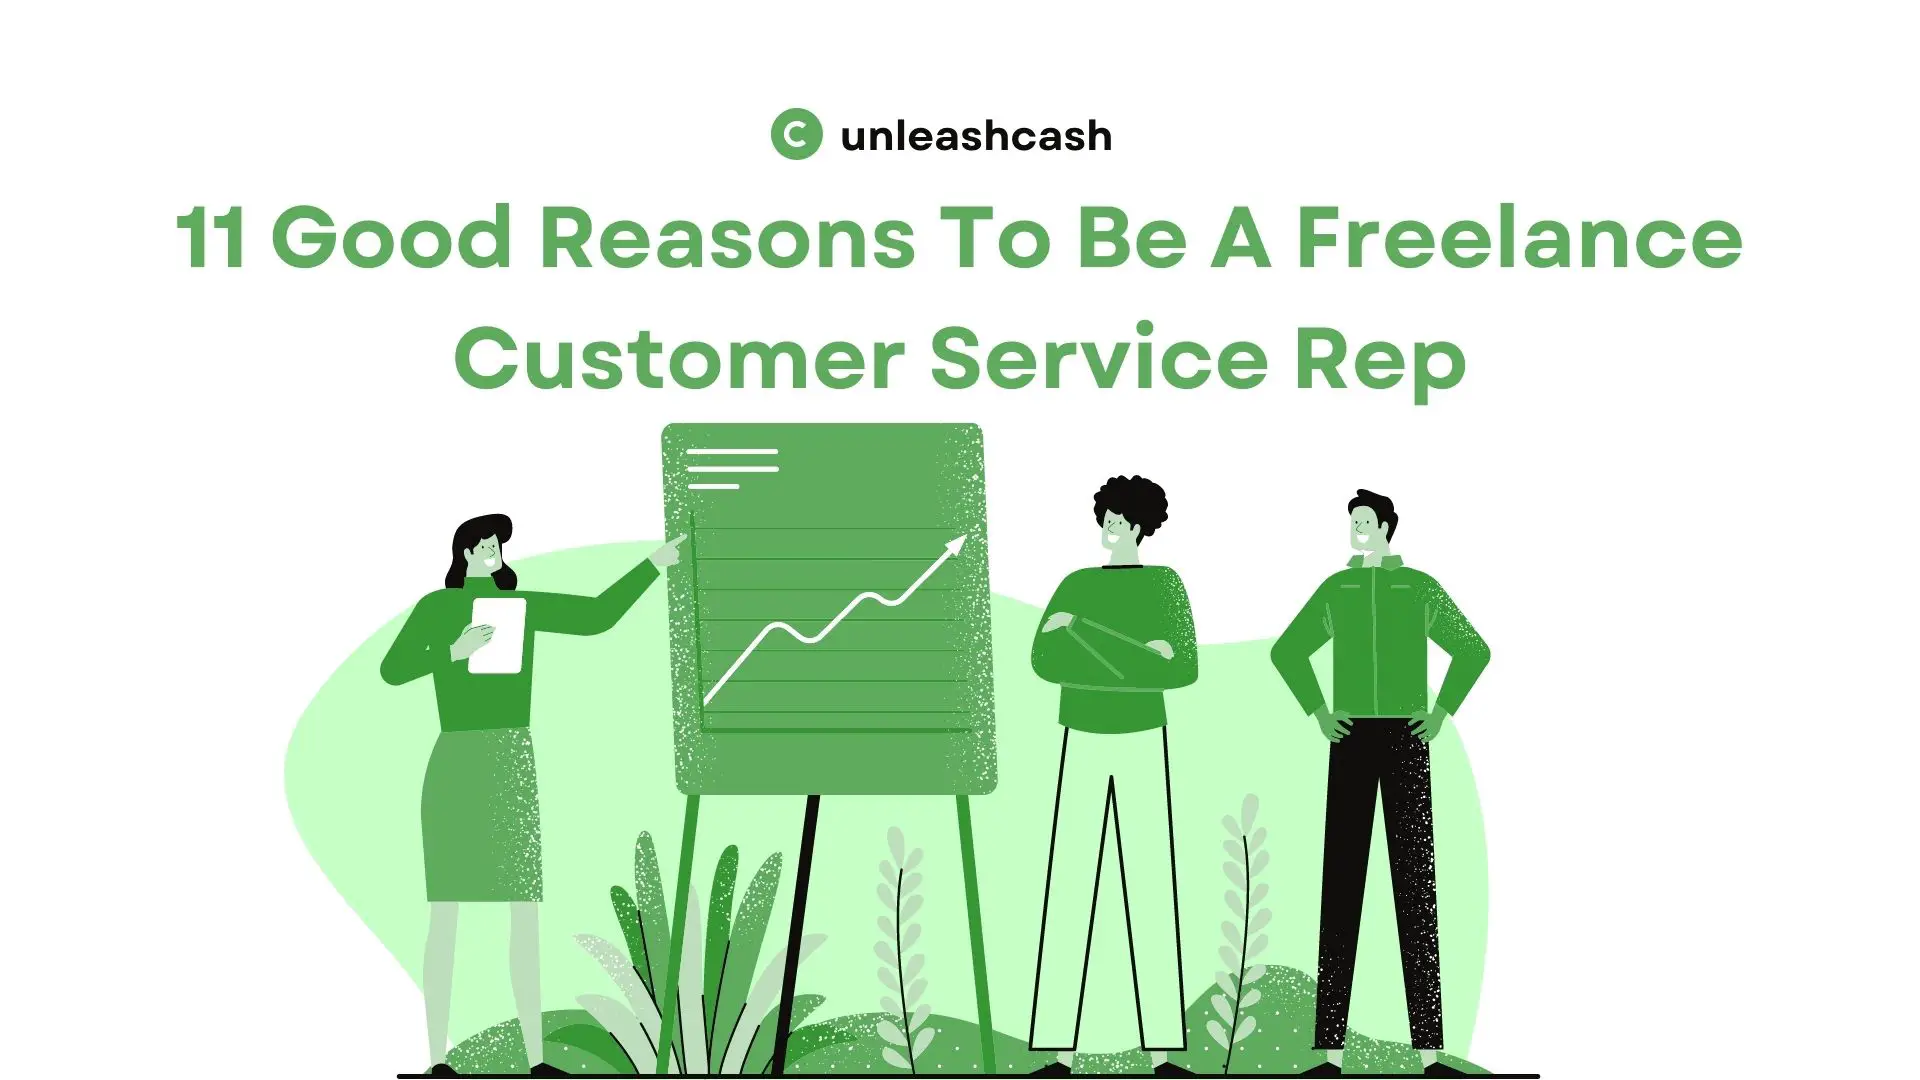 11 Good Reasons To Be A Freelance Customer Service Rep